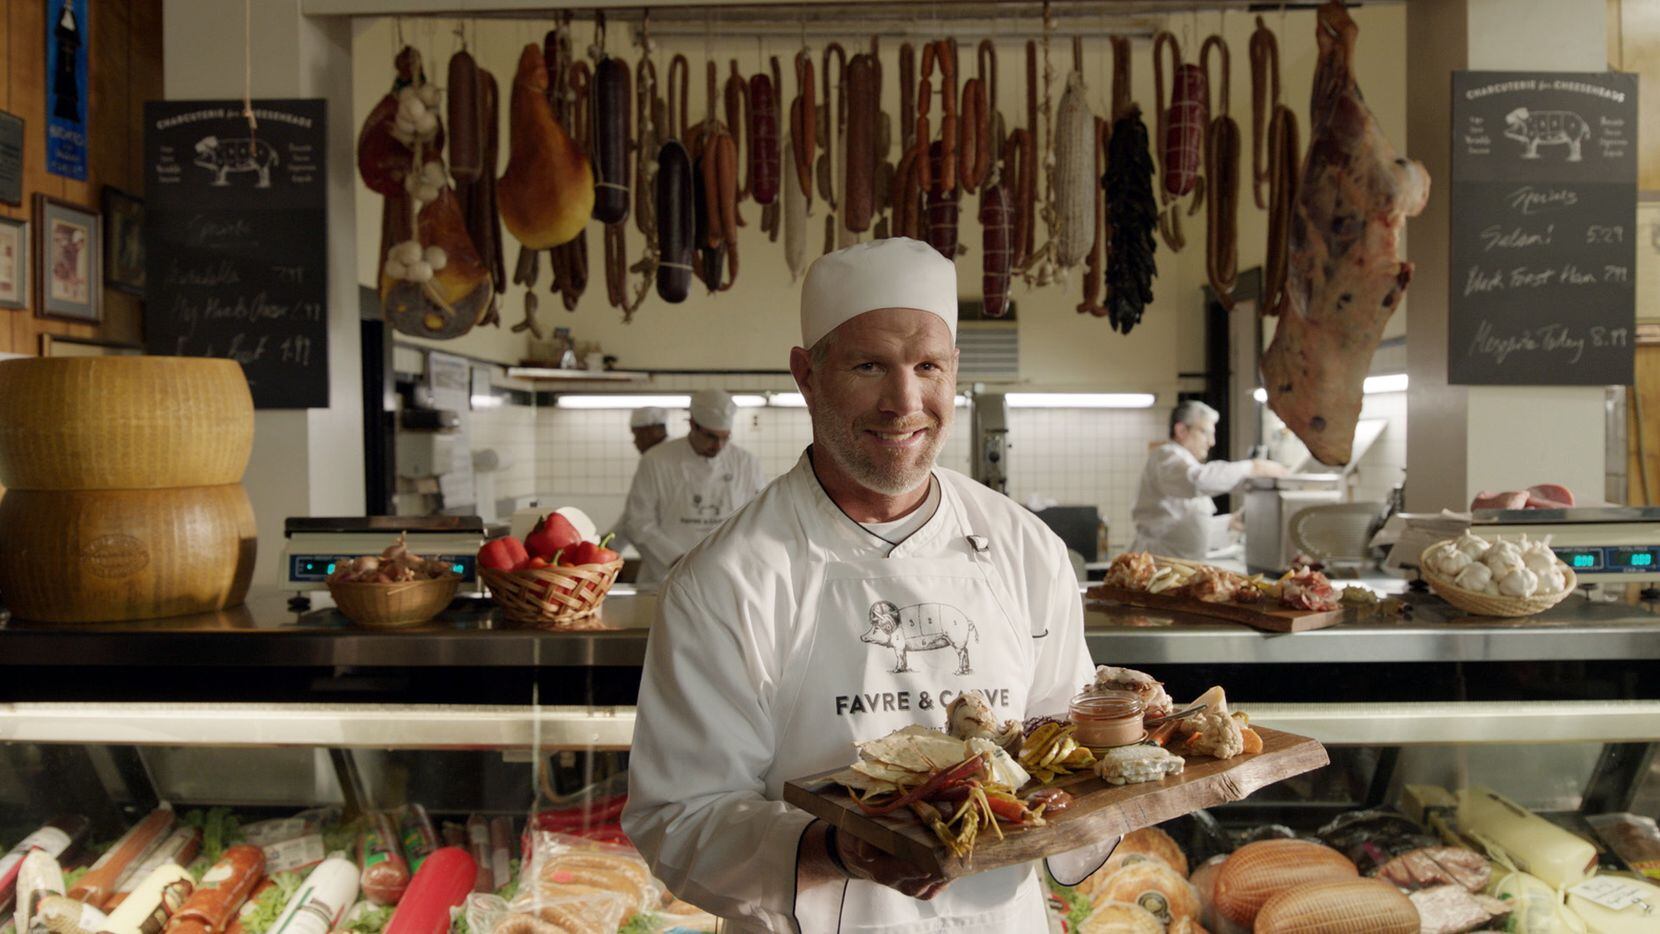 Wix.com's Super Bowl ad in 2015 featured retired football player Brett Favre with a funny...